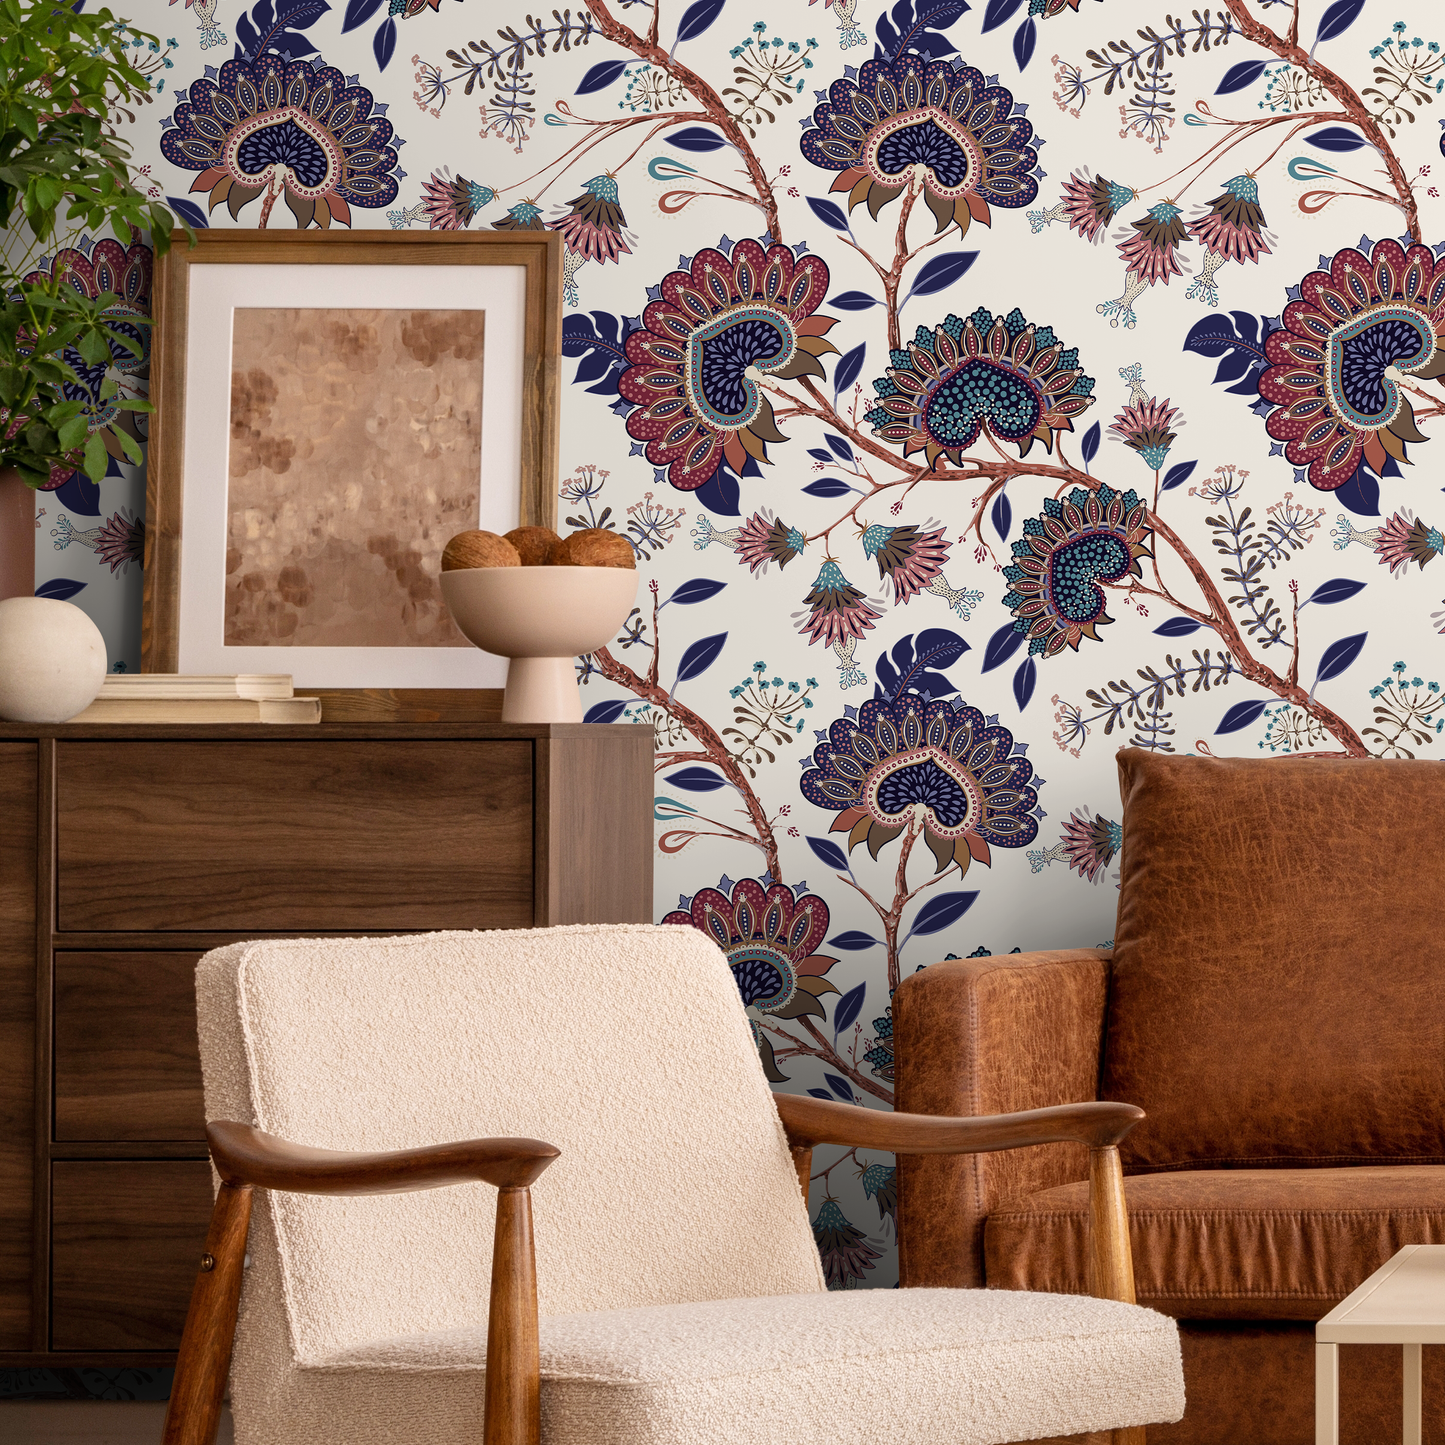 Boho Floral Wallpaper Vintage Garden Wallpaper Peel and Stick and Traditional Wallpaper - A916